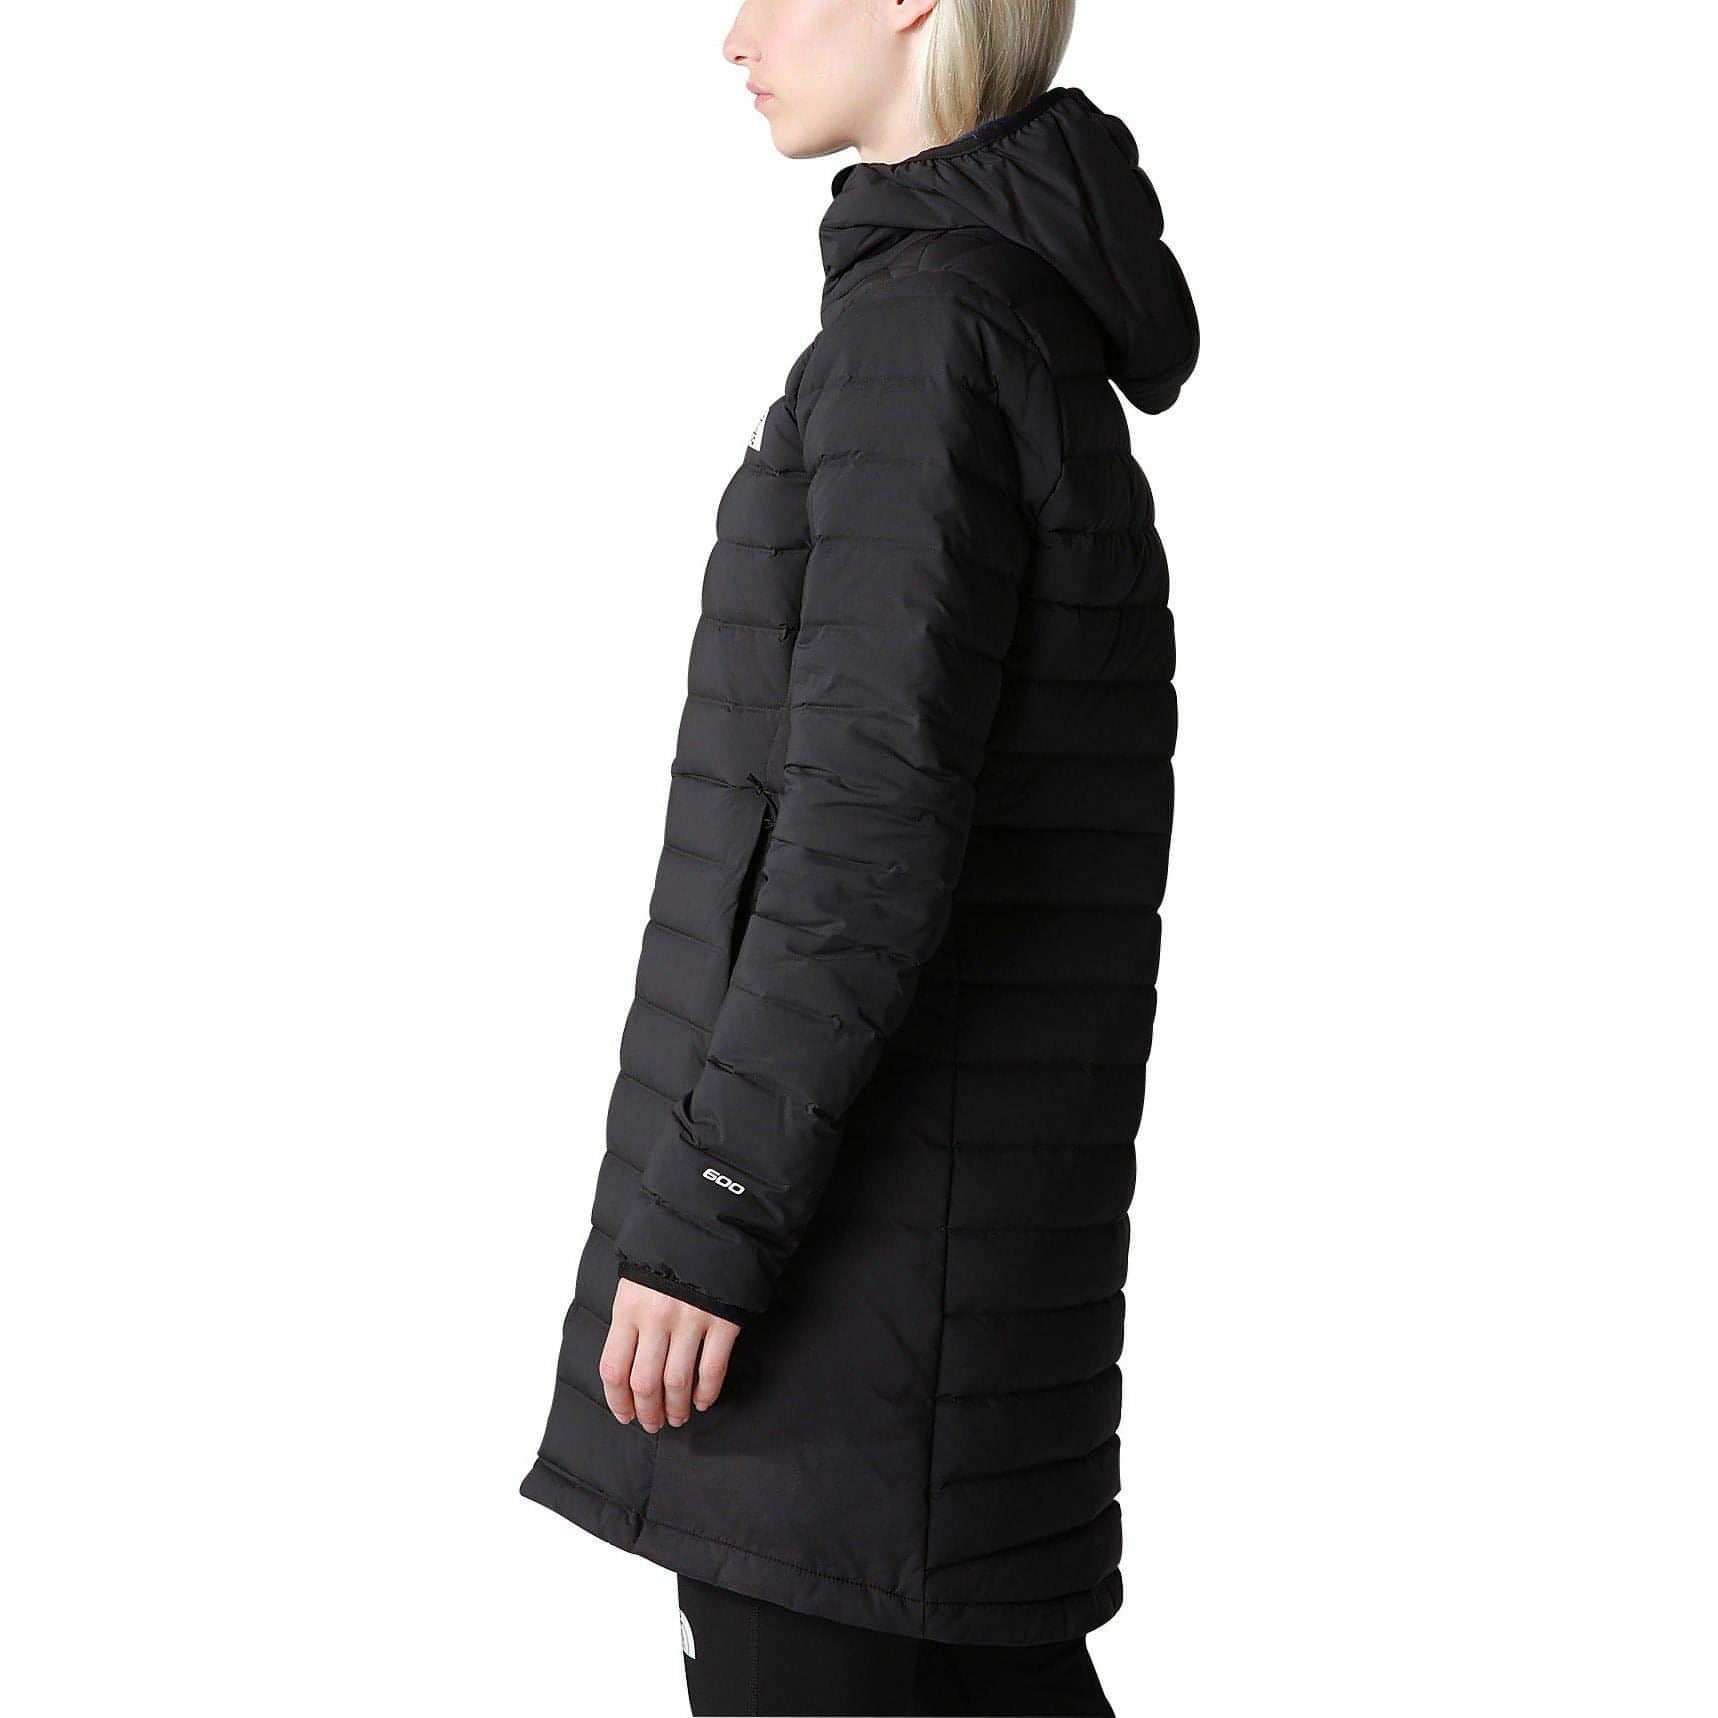 The North Face Belleview Stretch Womens Down Parka Jacket - Black